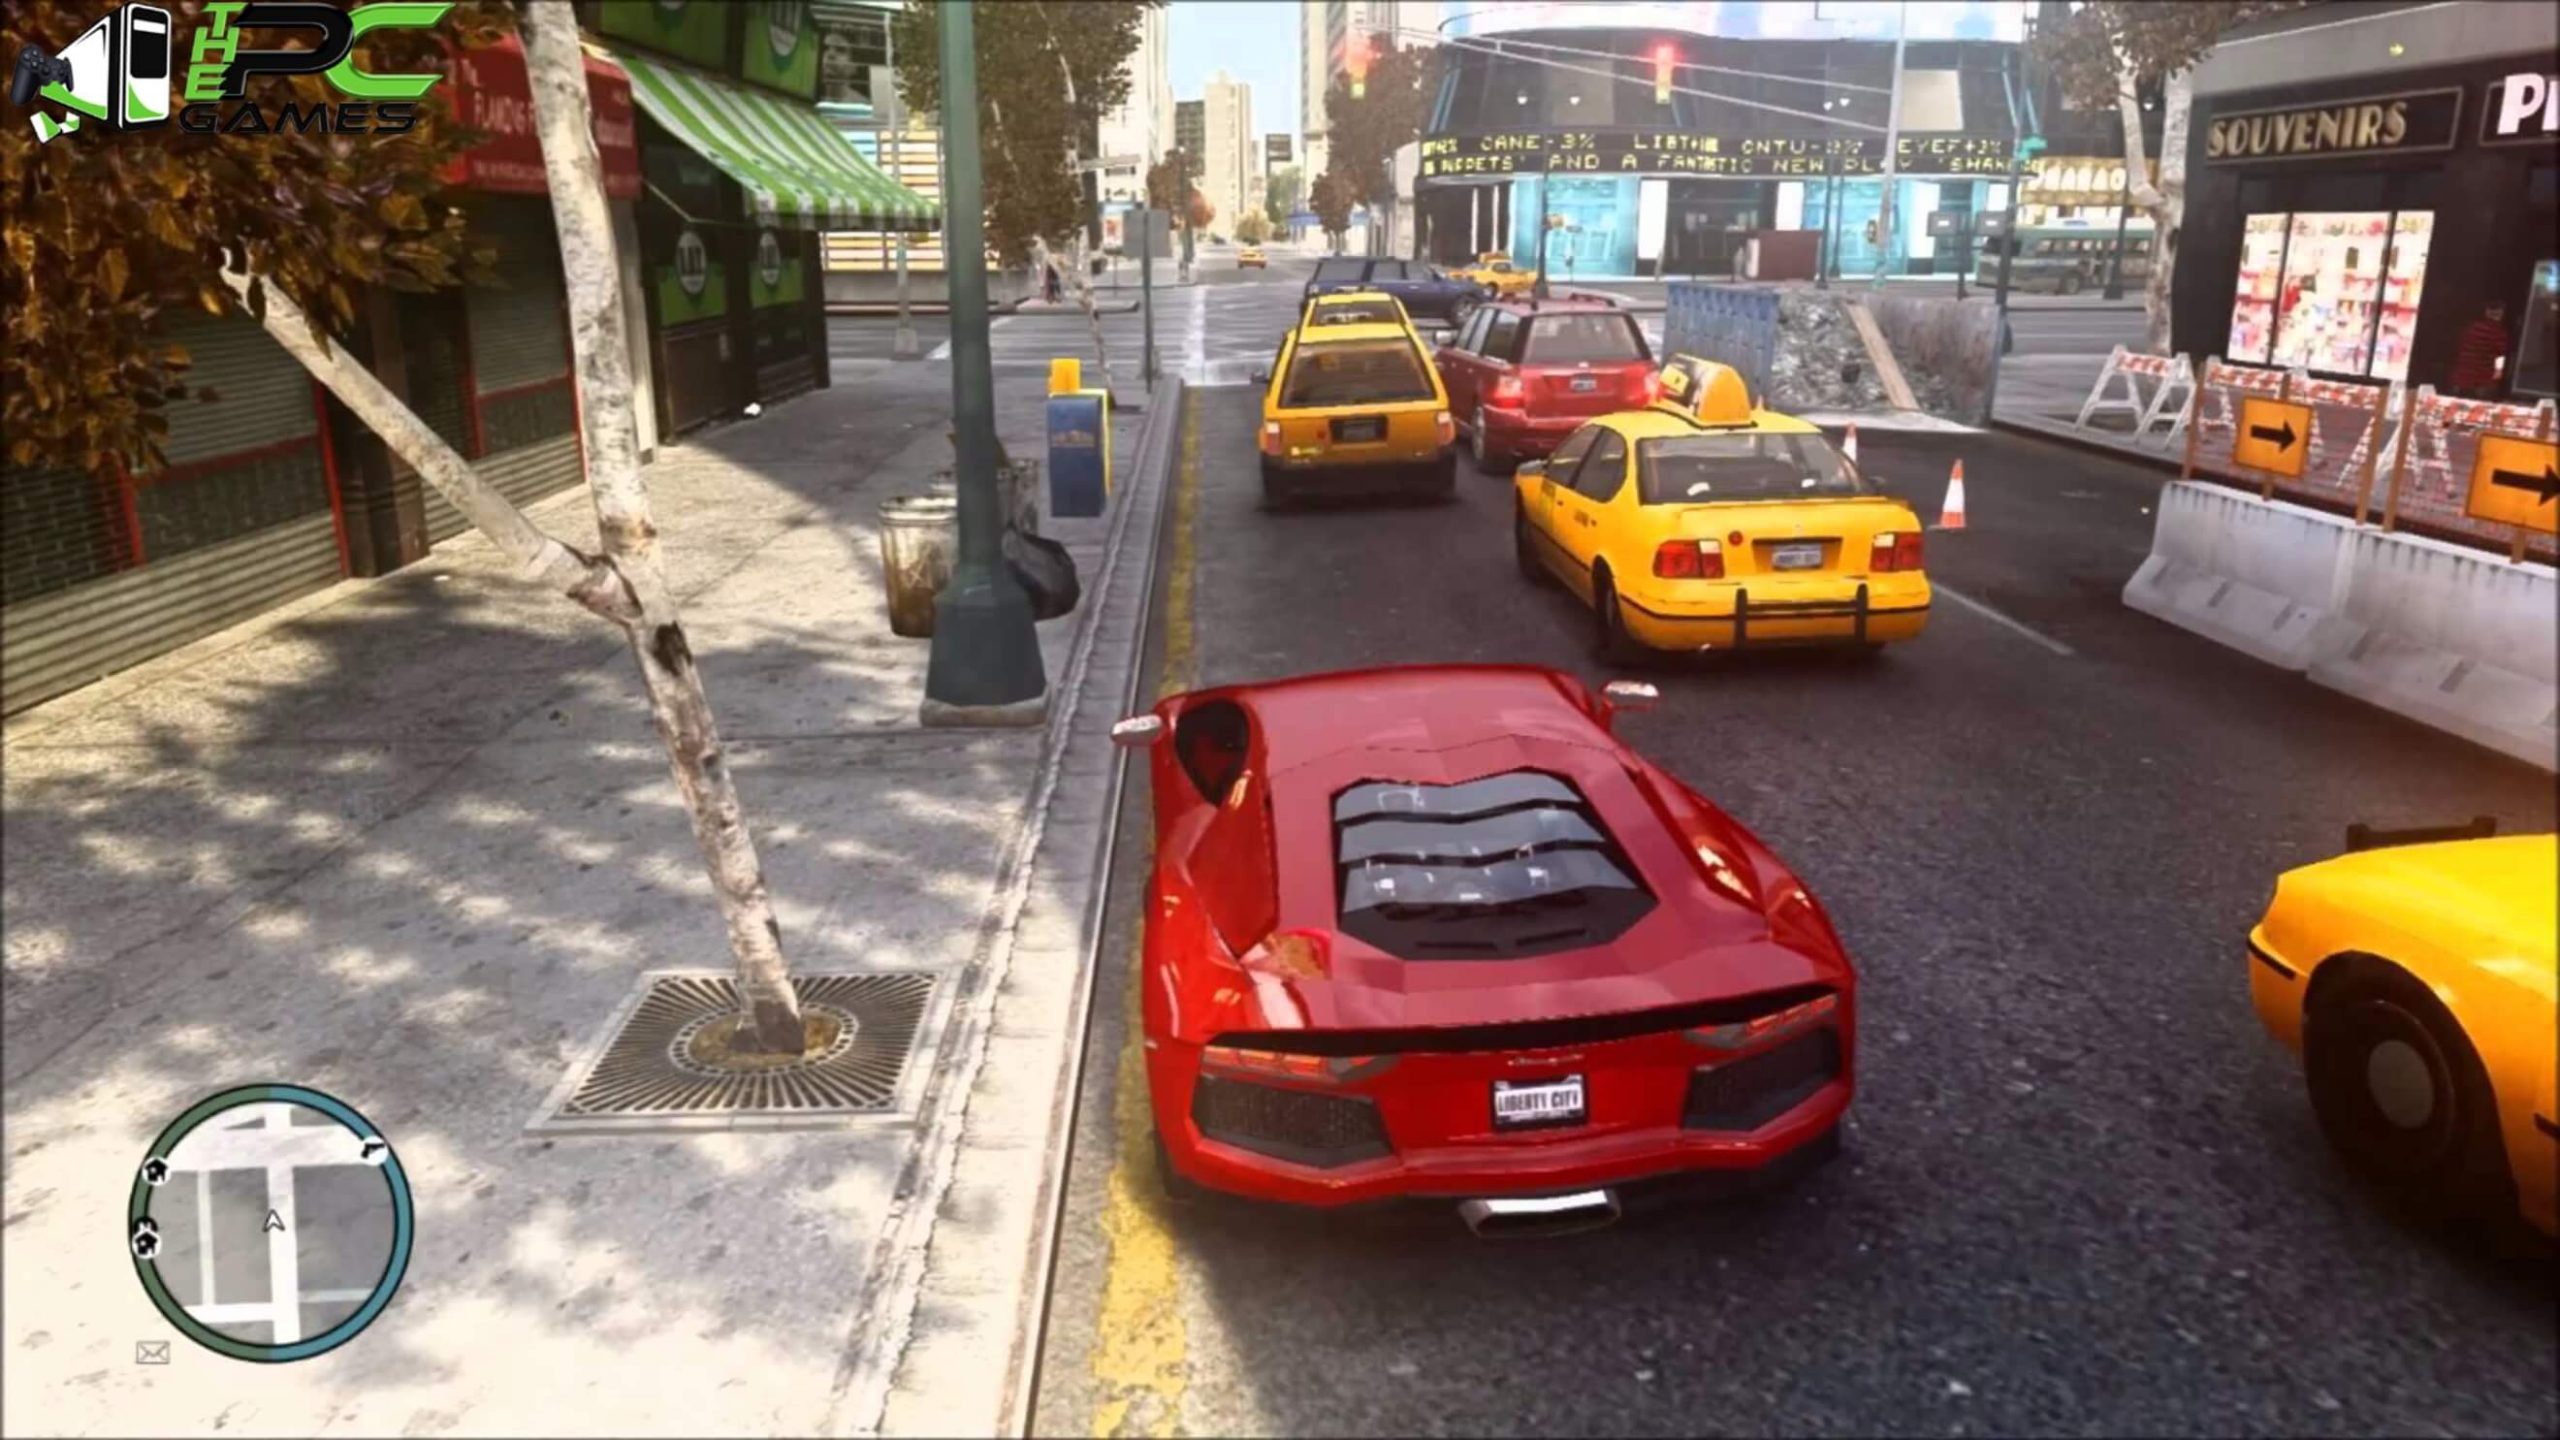 Gta Iv Pc Game Free Download - Nfcever destiné Gta 5Gameplay Voiture